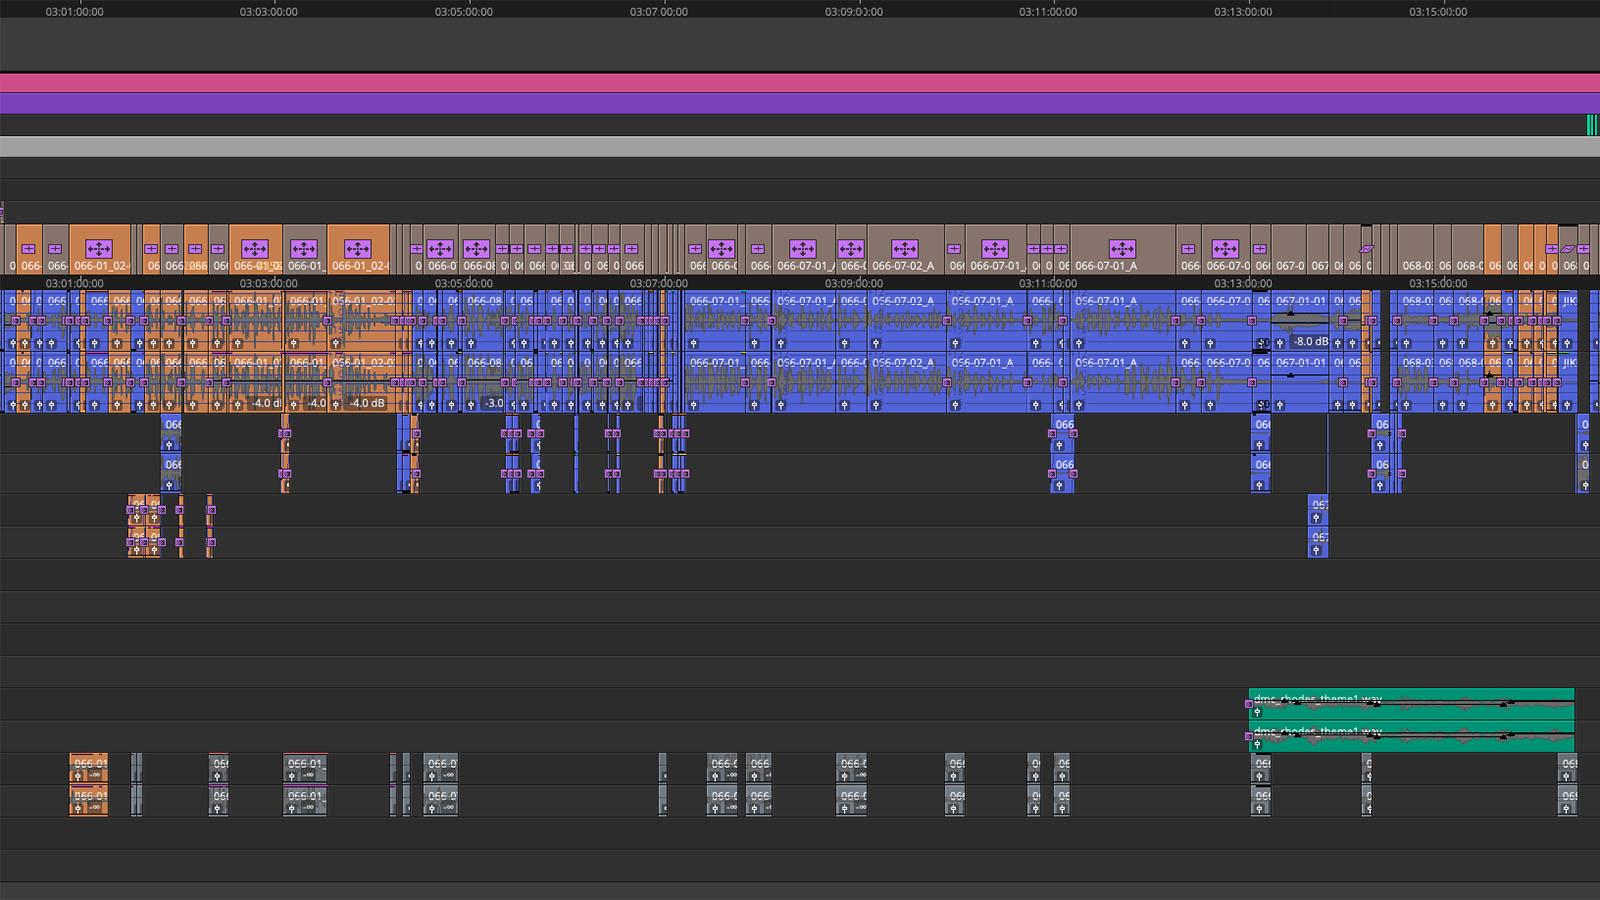 Timeline for scenes 66, 67, and 68 of Drive My Car. 